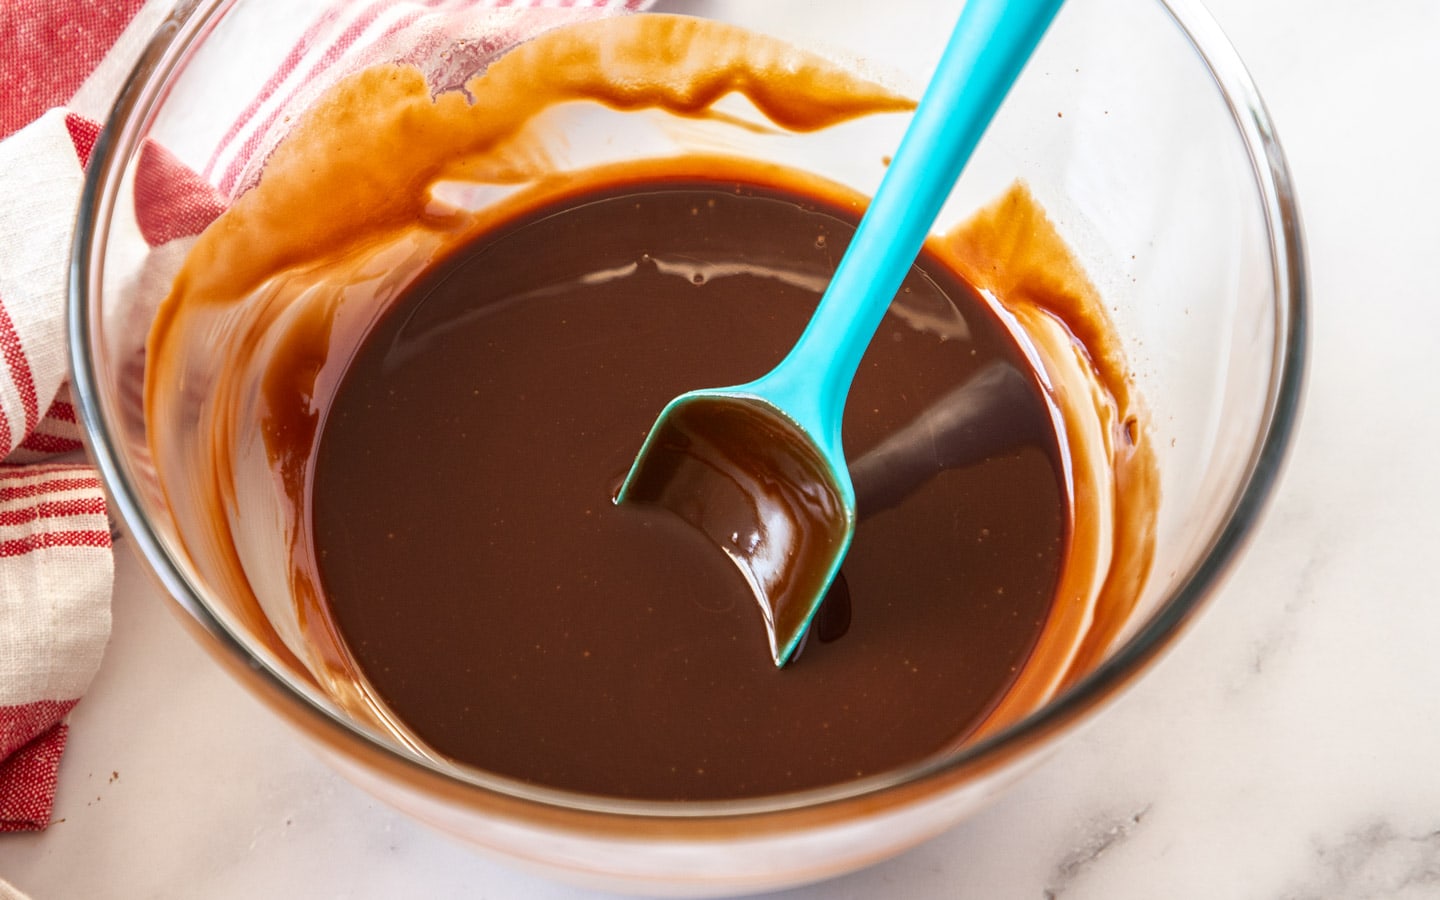 Melted butter and chocolate in a bowl.